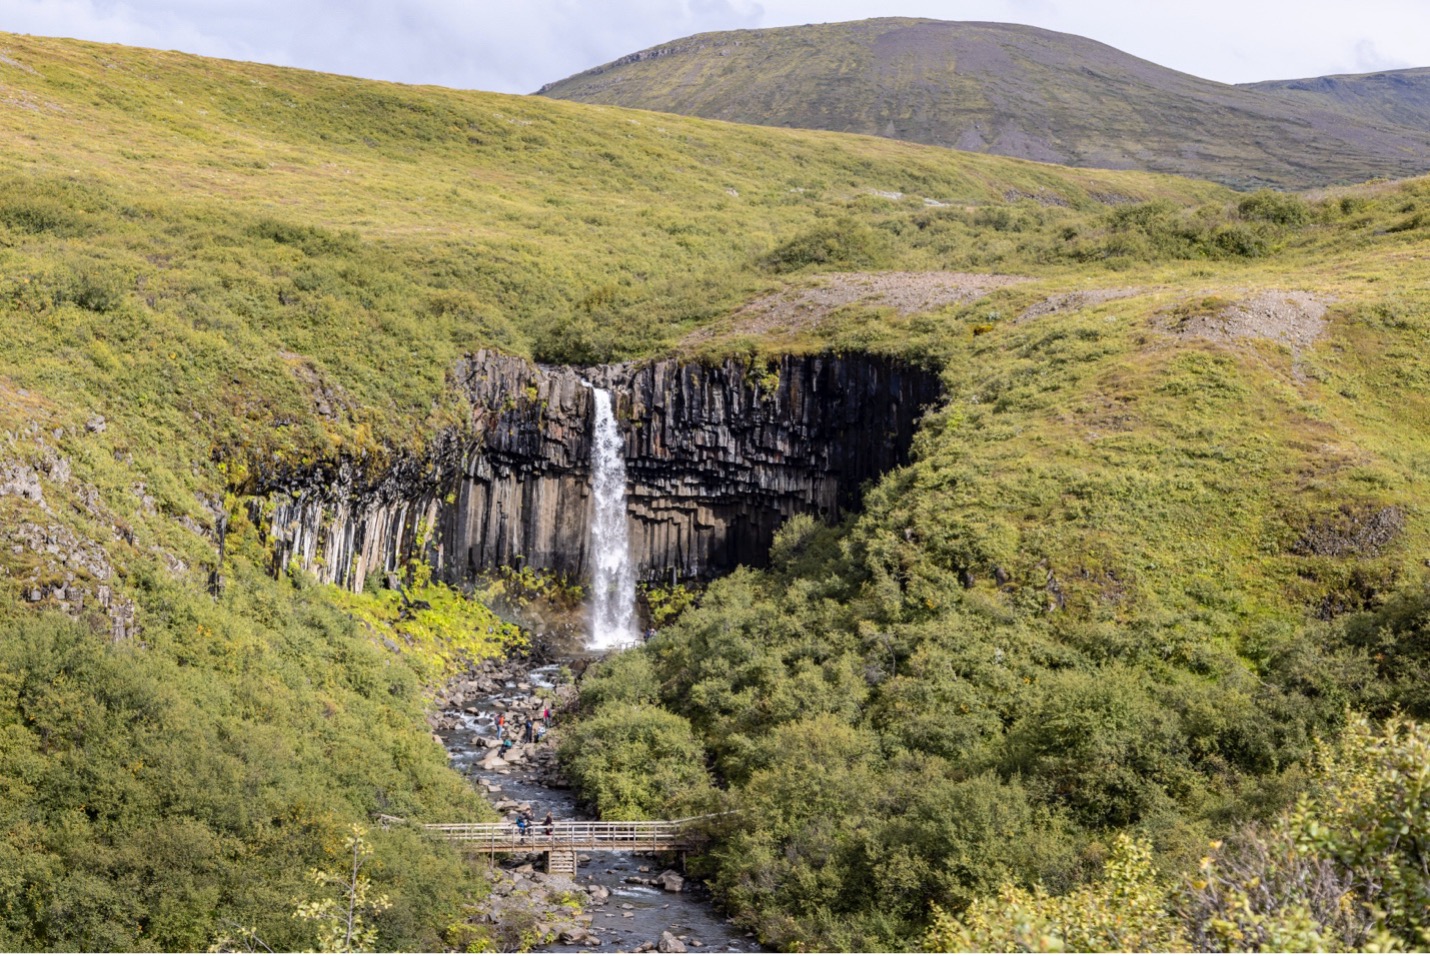 a tall waterfall makes the surrounding scenery look massive